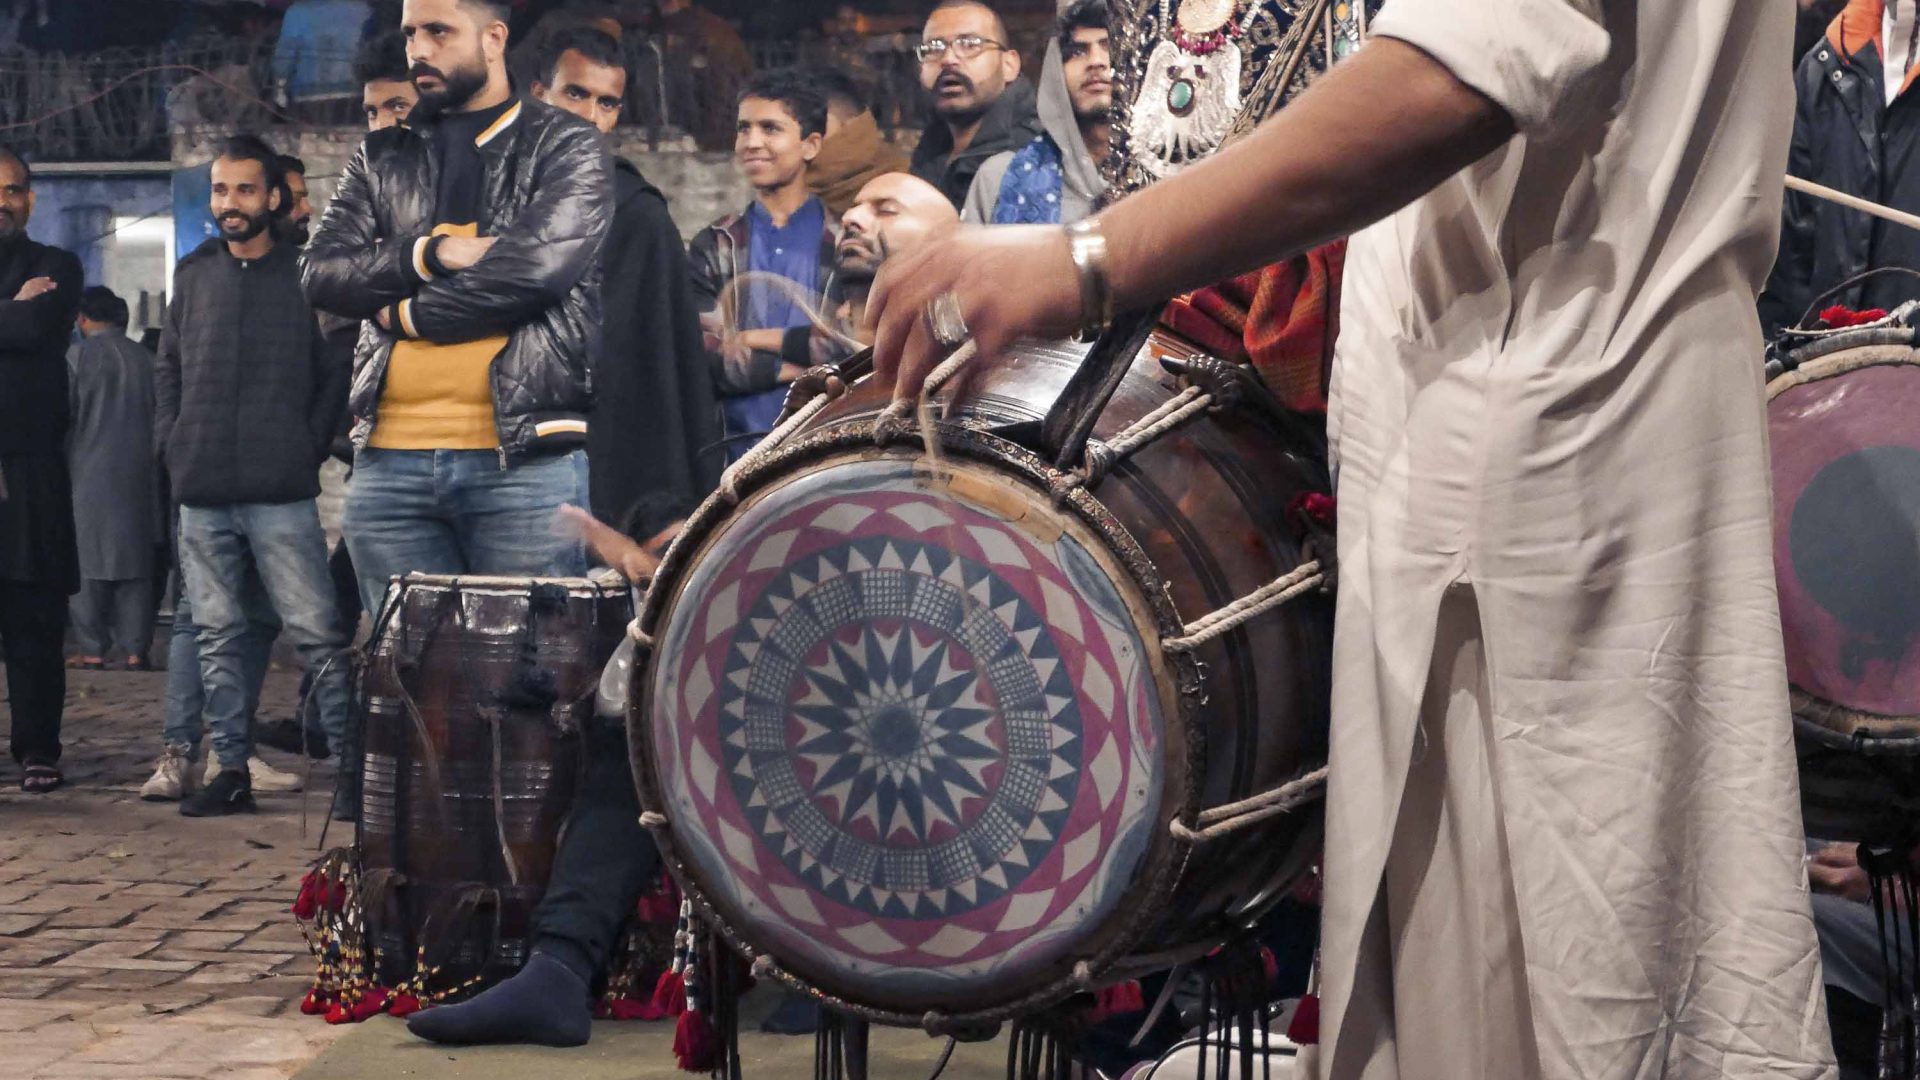 Close up on a drum being played.